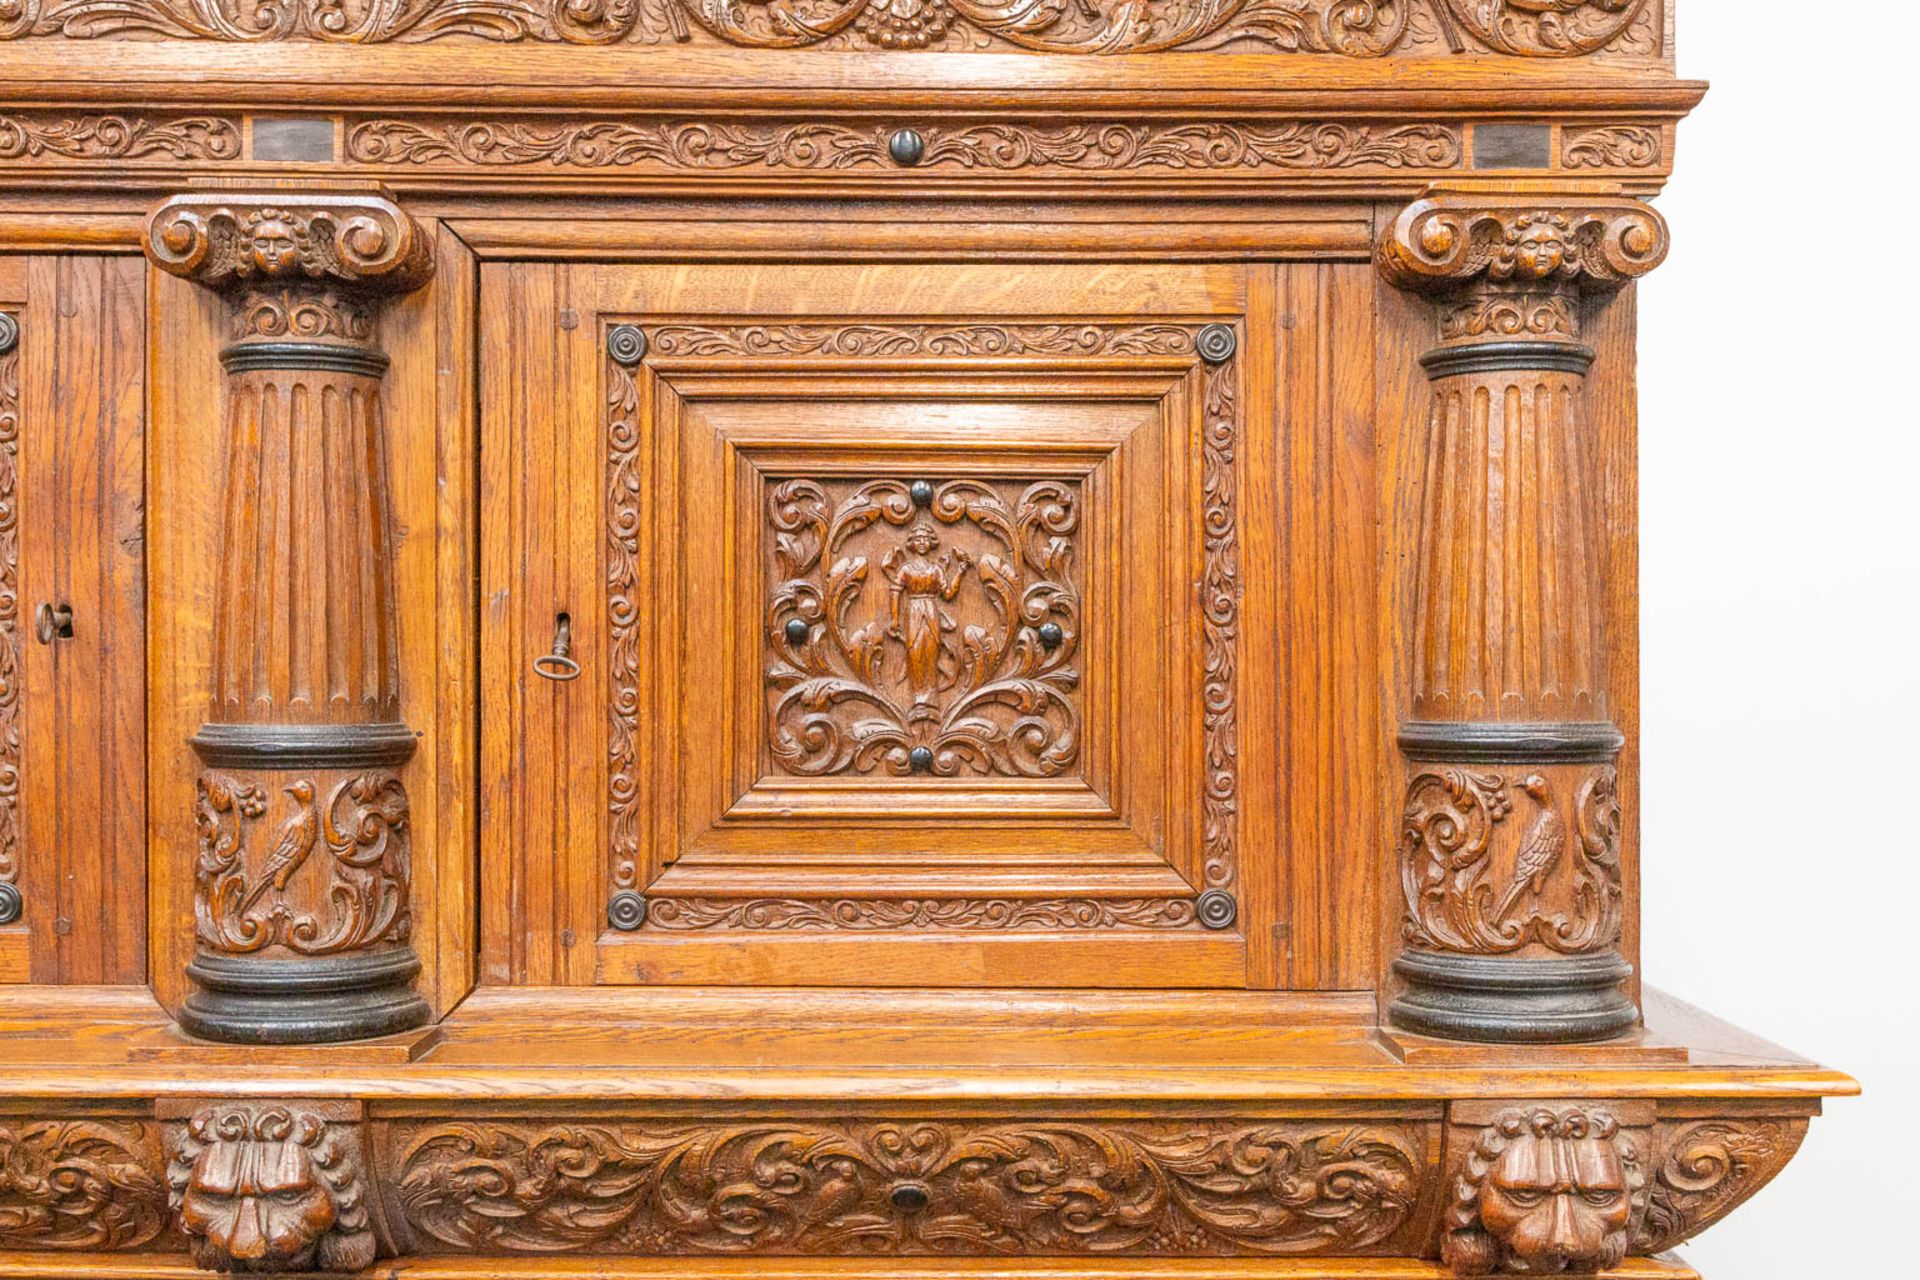 A cabinet, made in Flemish renaissance style, oak with fine sculptures, 19th century. - Image 26 of 27